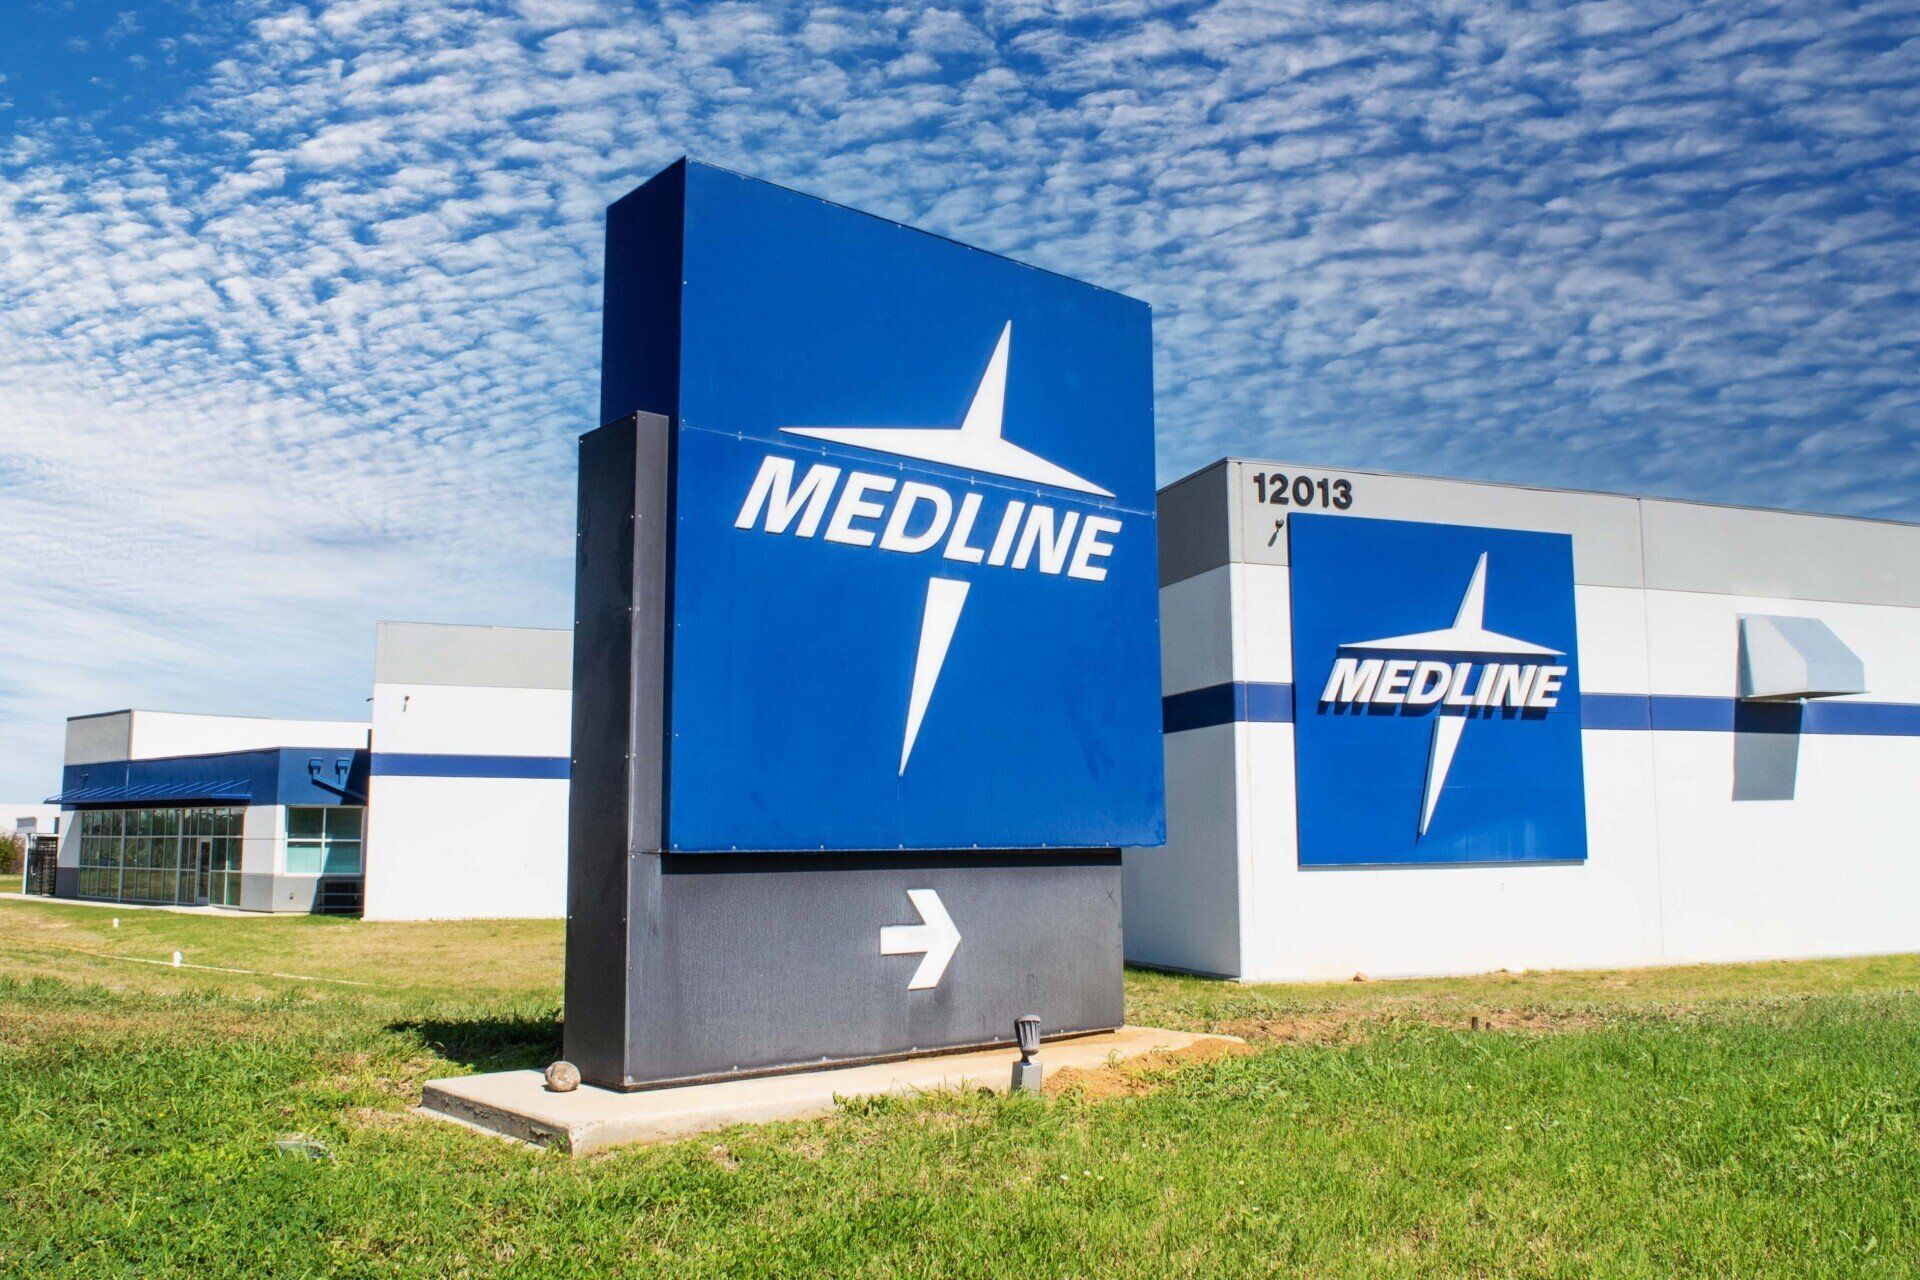 Quantum Building Services finishes construction on a facility for Medline in Laredo, Tx.